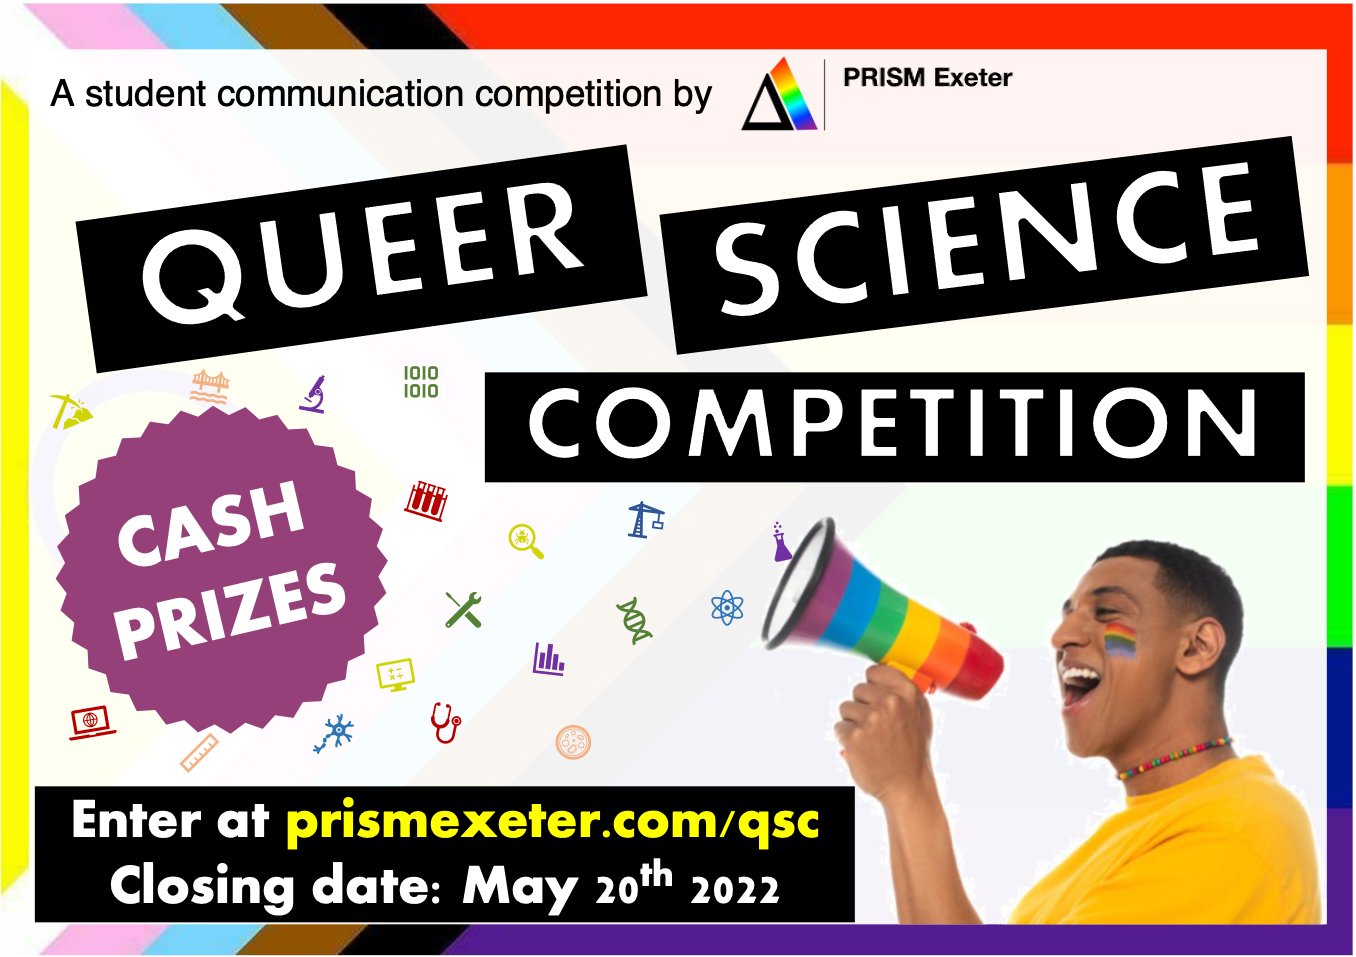 Queer Science Competition prism exeter.jpg